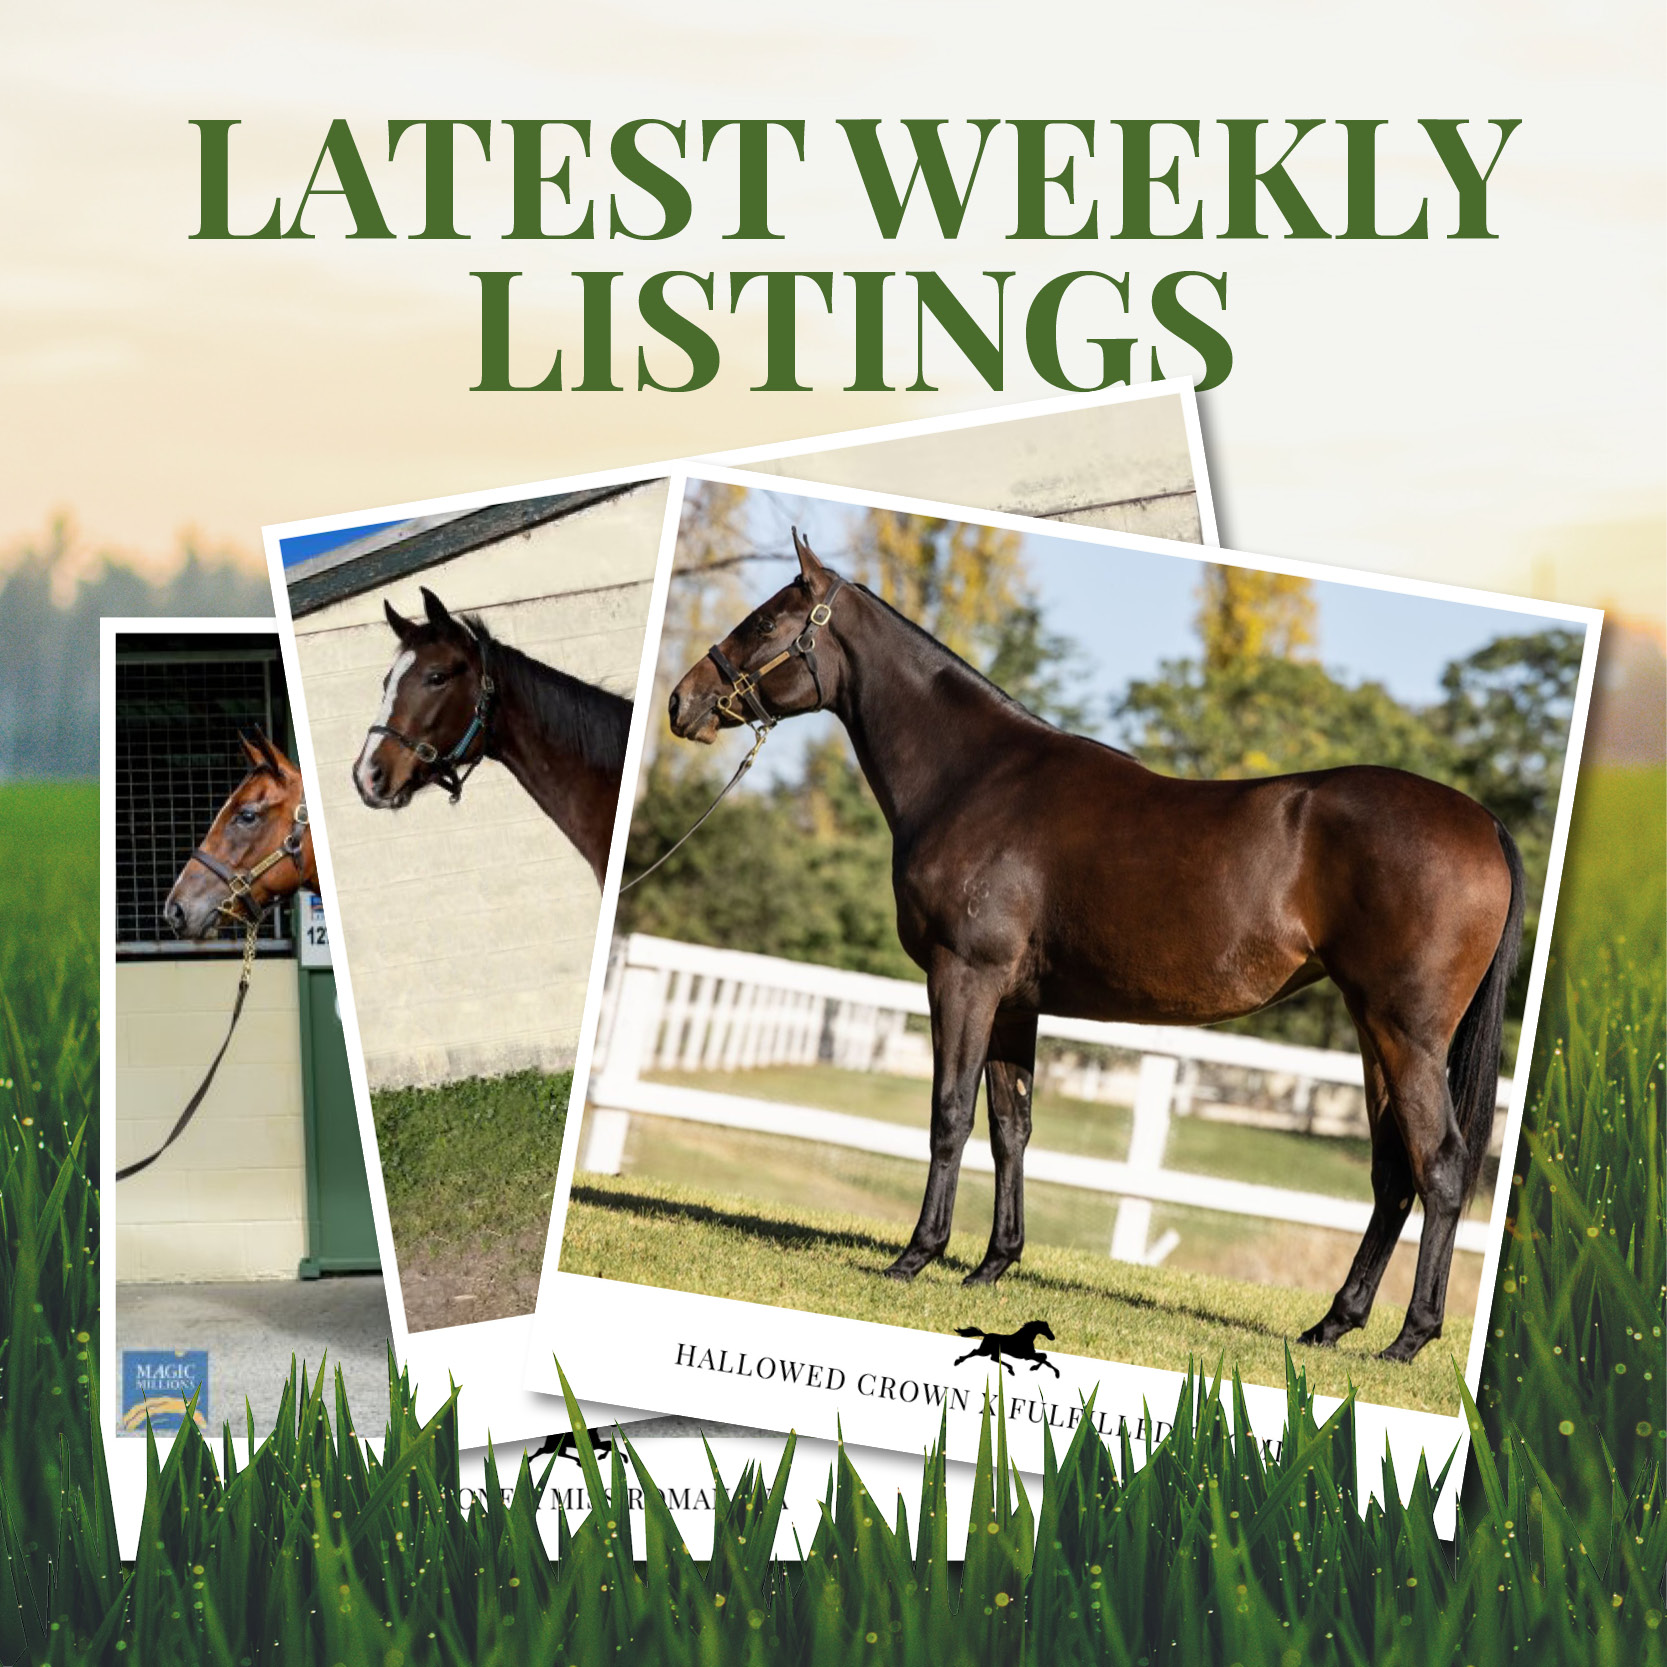 Latest Weekly Listings – Super One, Preferment and Hallowed Crown